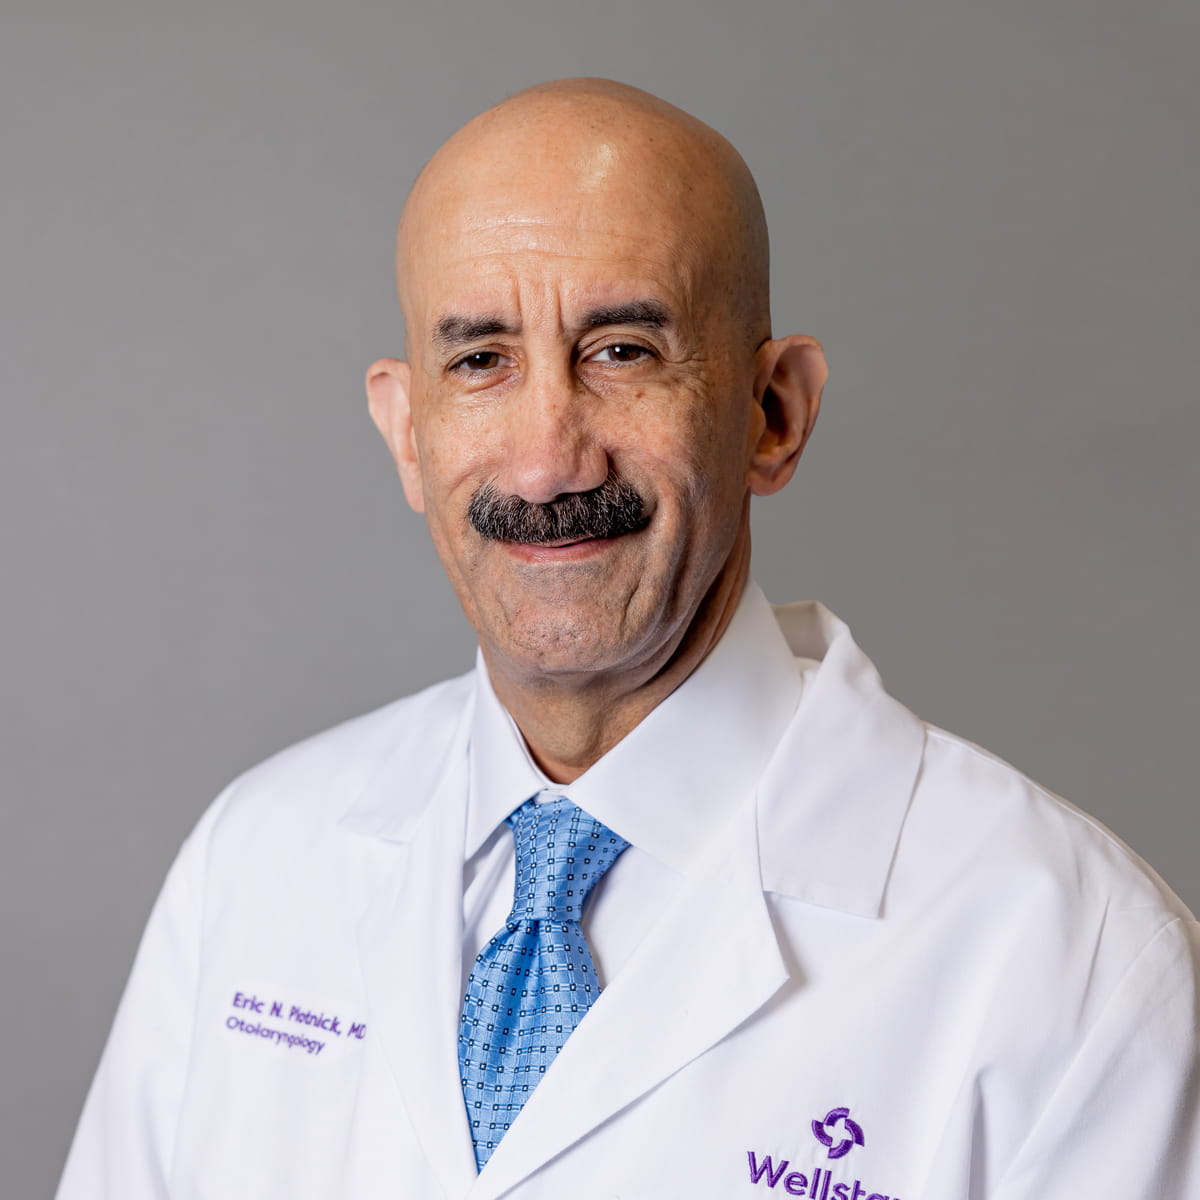 A friendly image of Eric Plotnick, MD